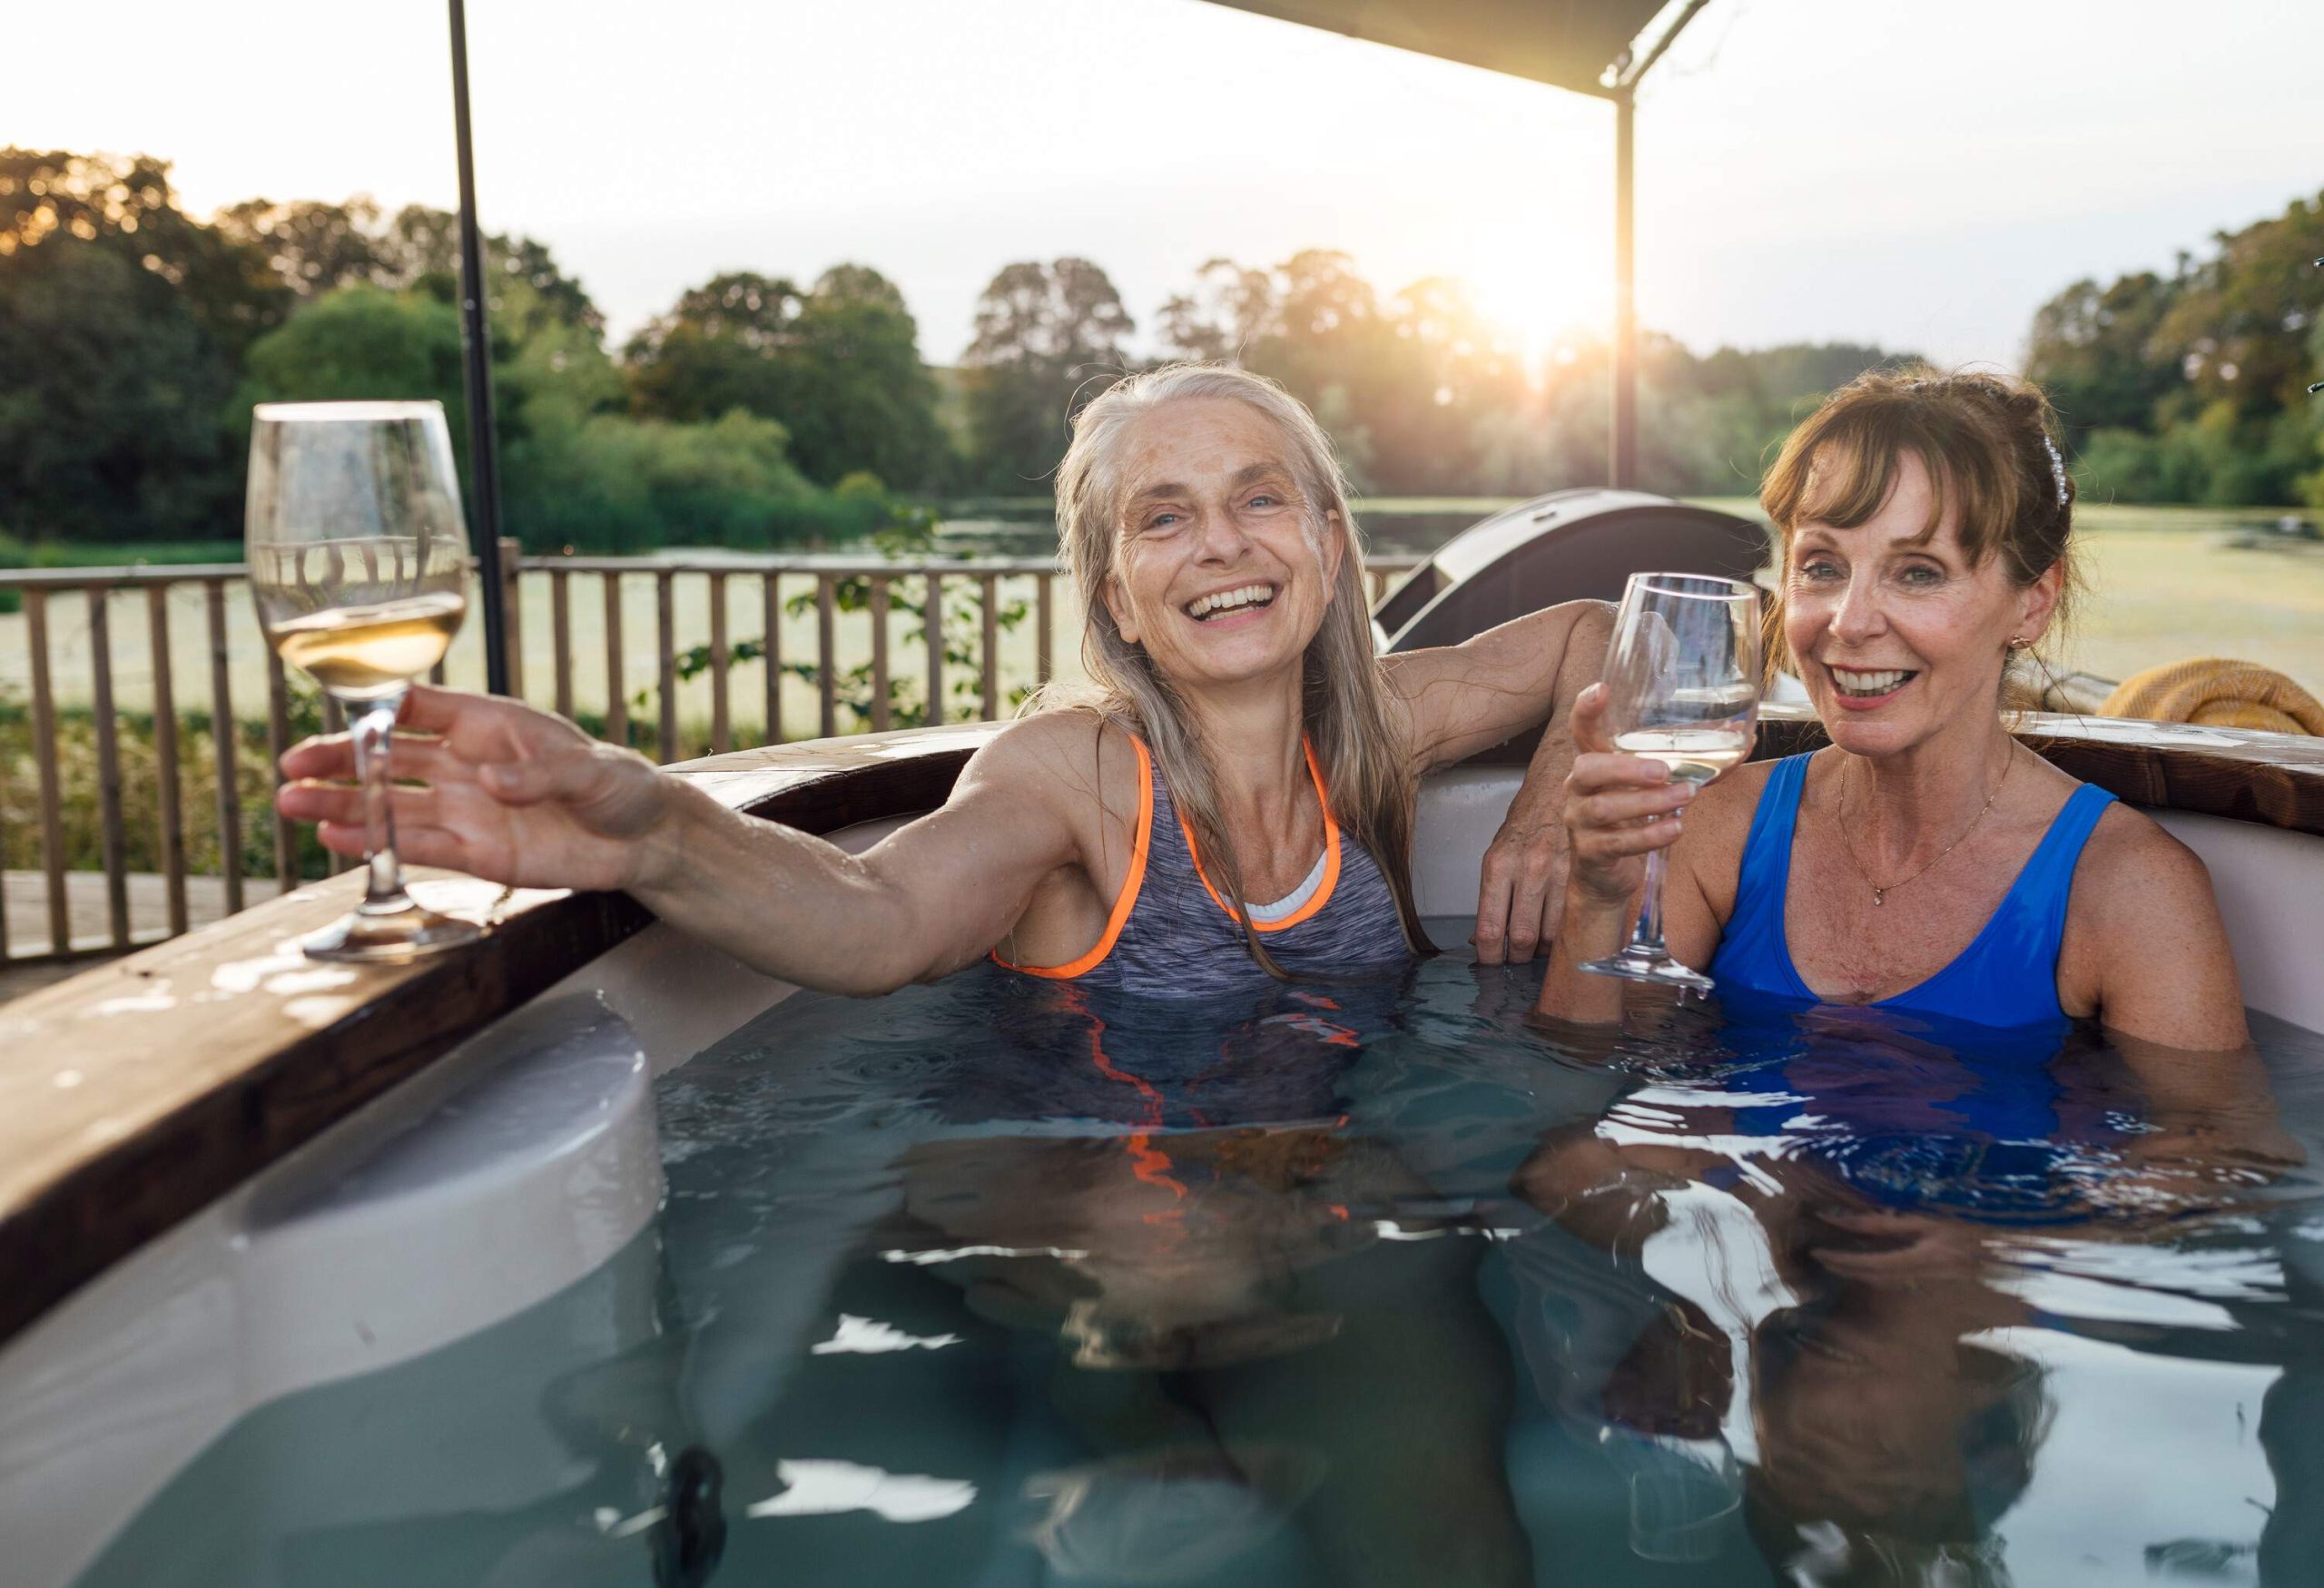 Two mature women submerged in a hot tub while drinking wine.